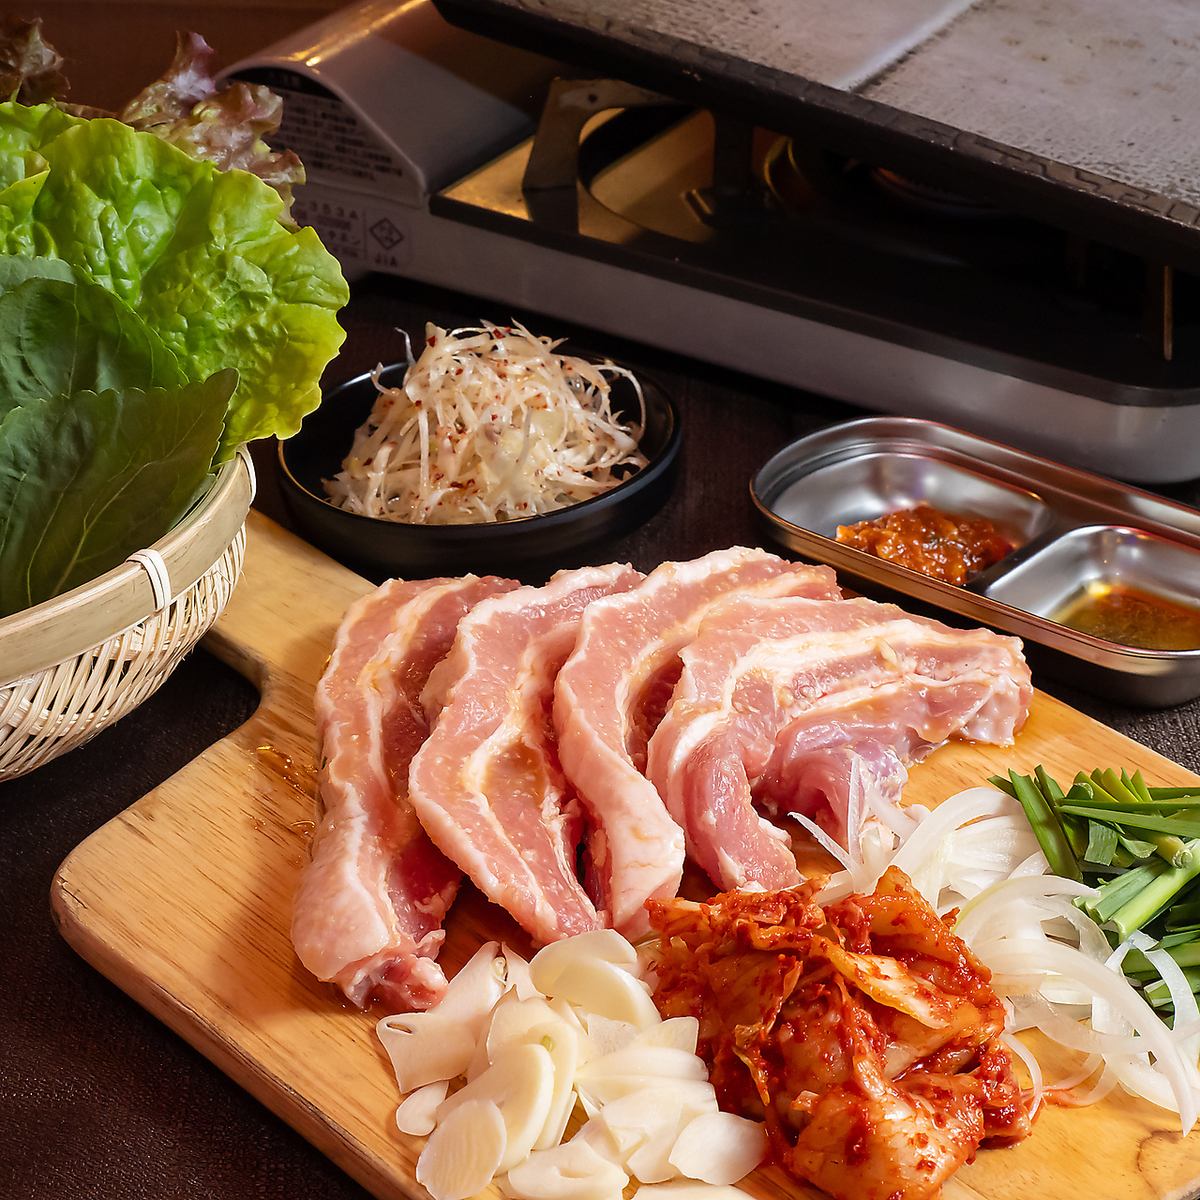 A wide variety of Korean cuisine that can be enjoyed by people of all ages★